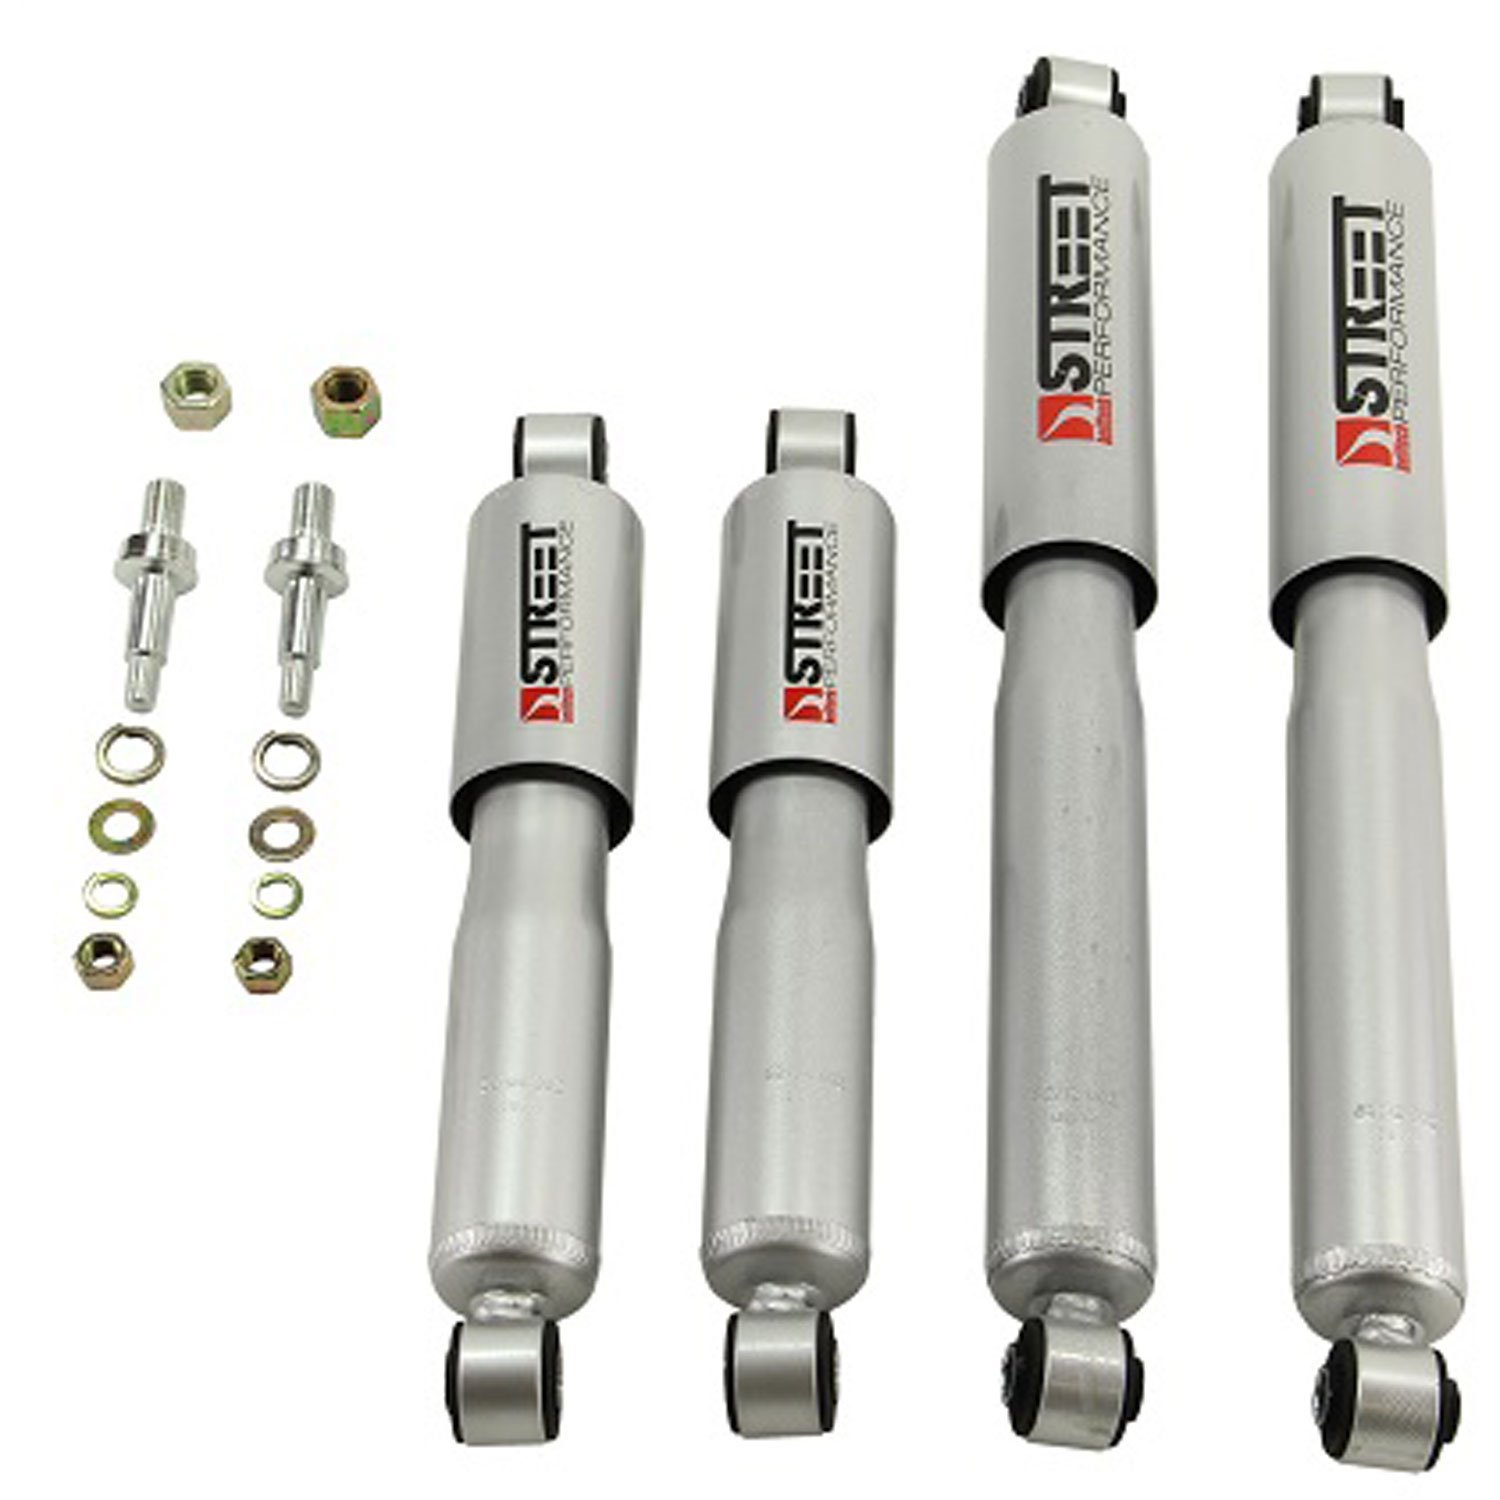 Street Performance Shock Set includes (2) 146-2104HA Front Shocks and (2) 146-2212IF Rear Shocks